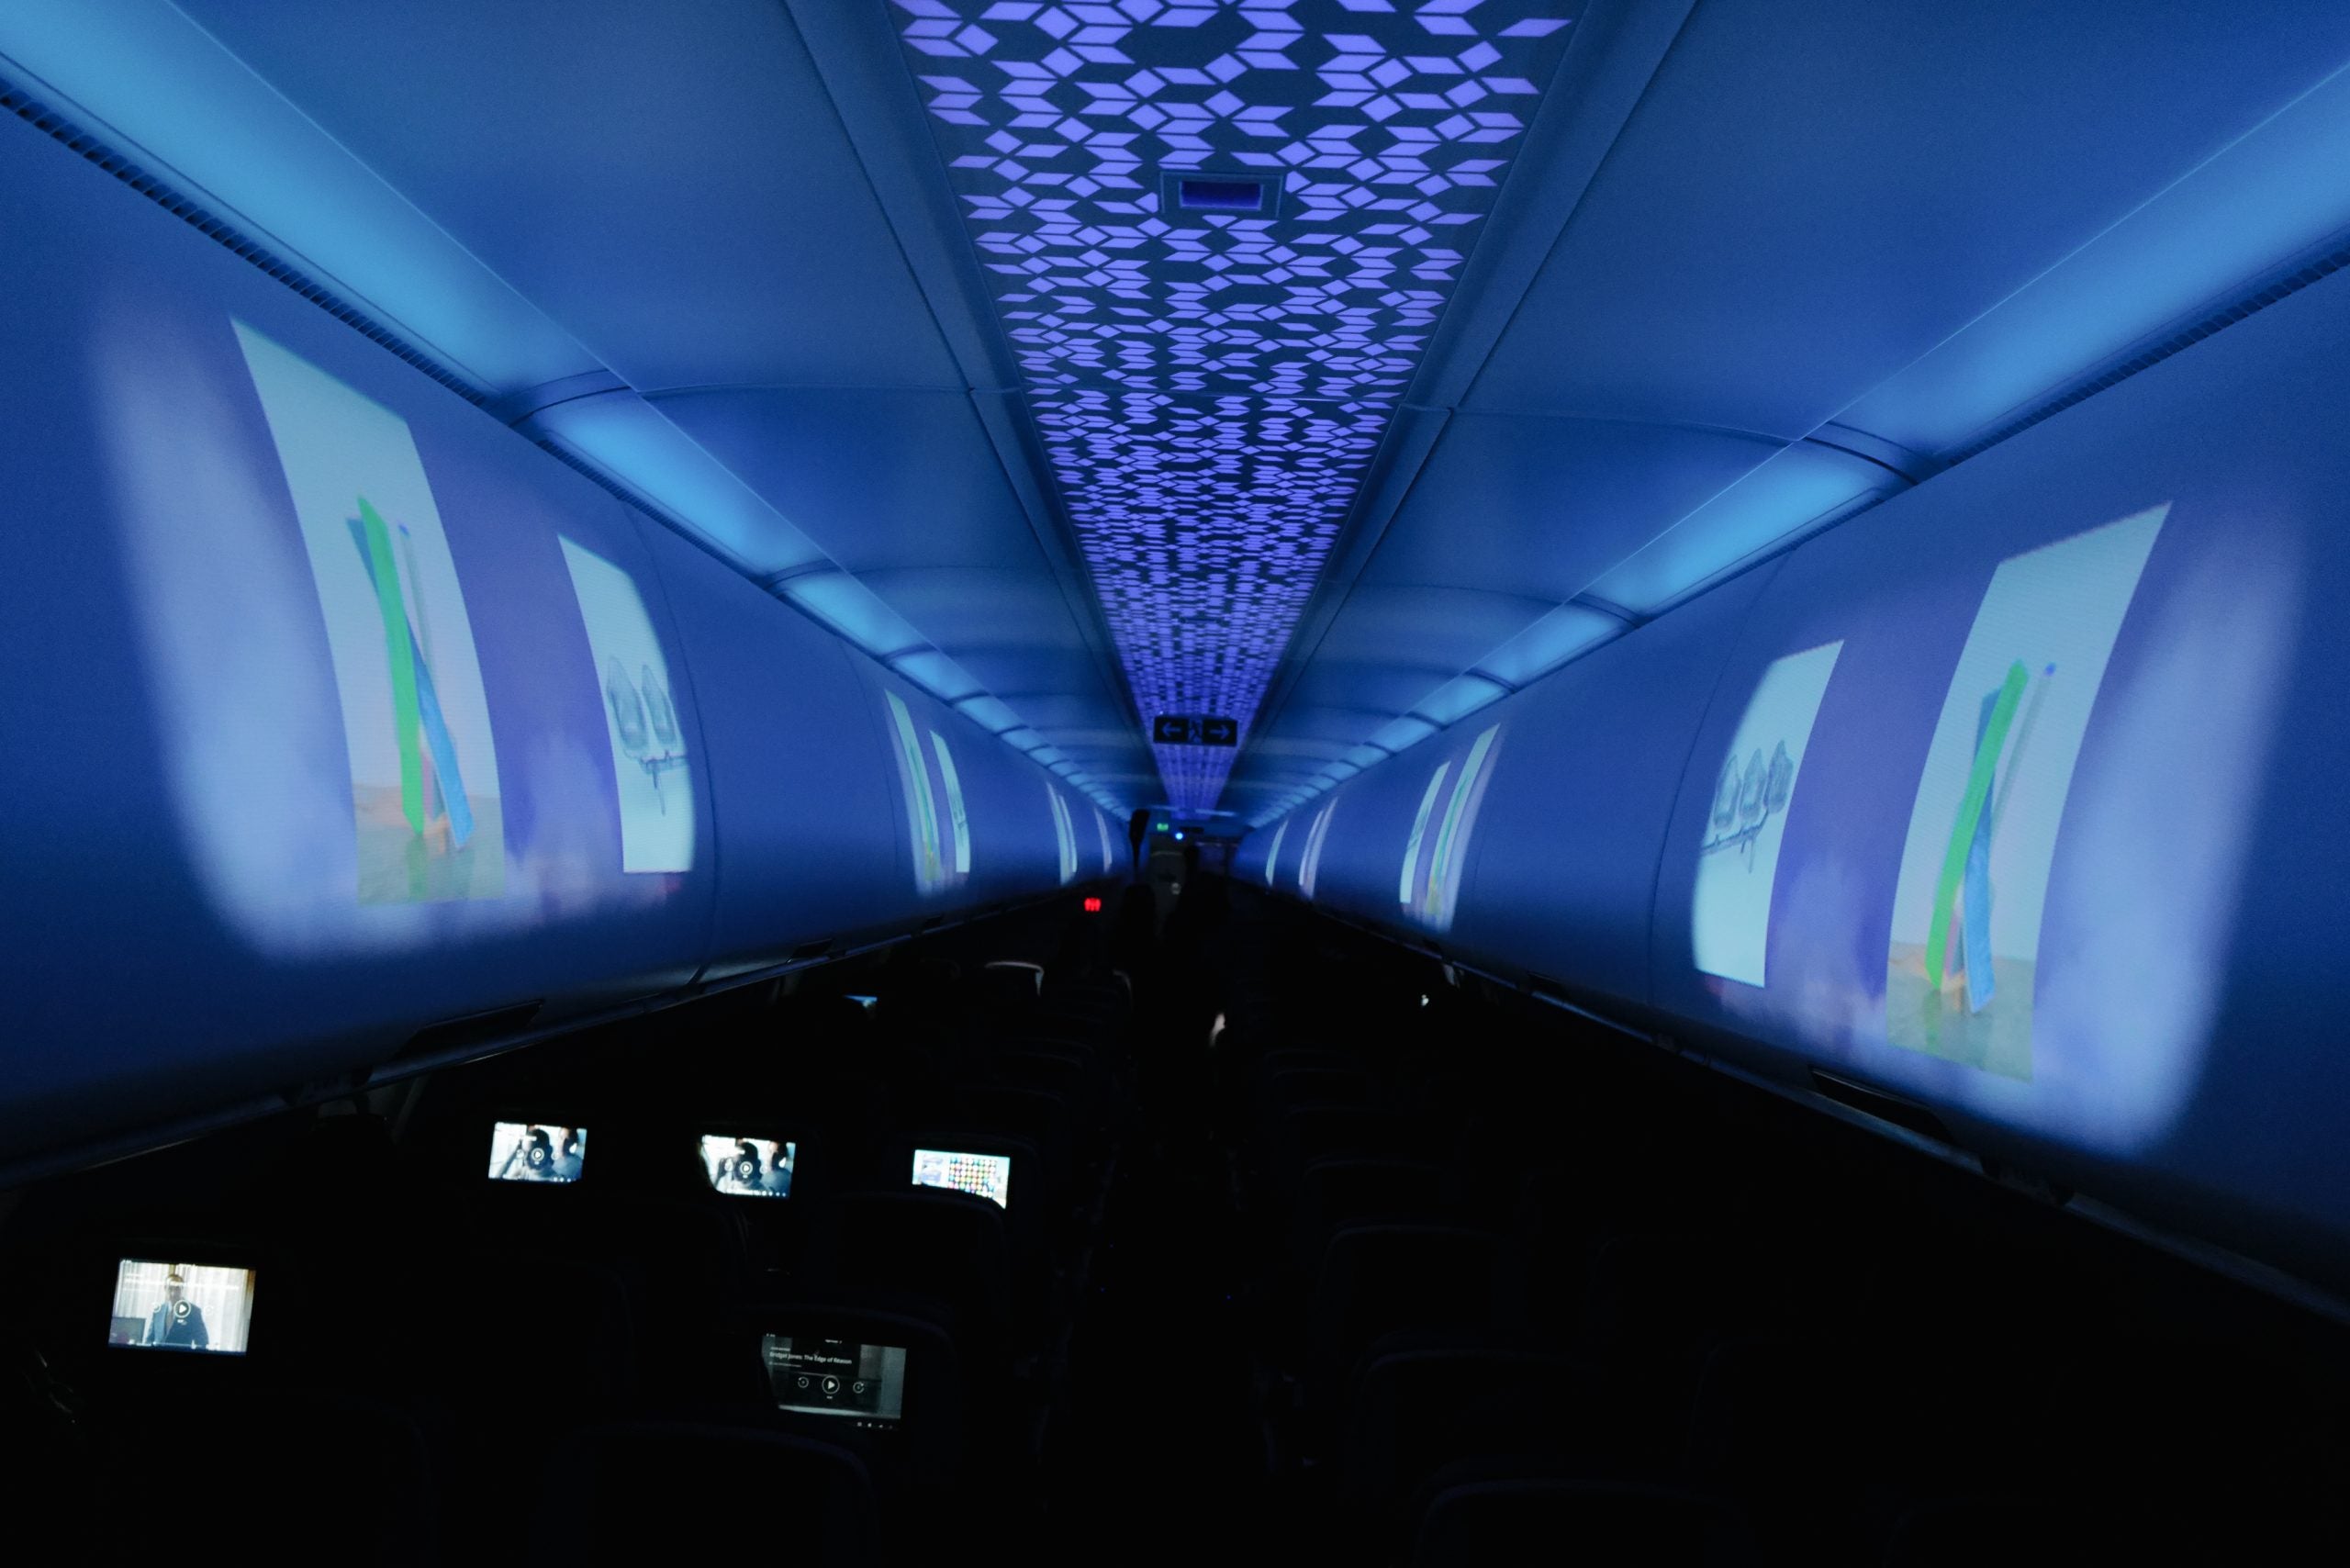 Delta Turned A Plane Into An Immersive Art Gallery For Art Basel And We Were On It